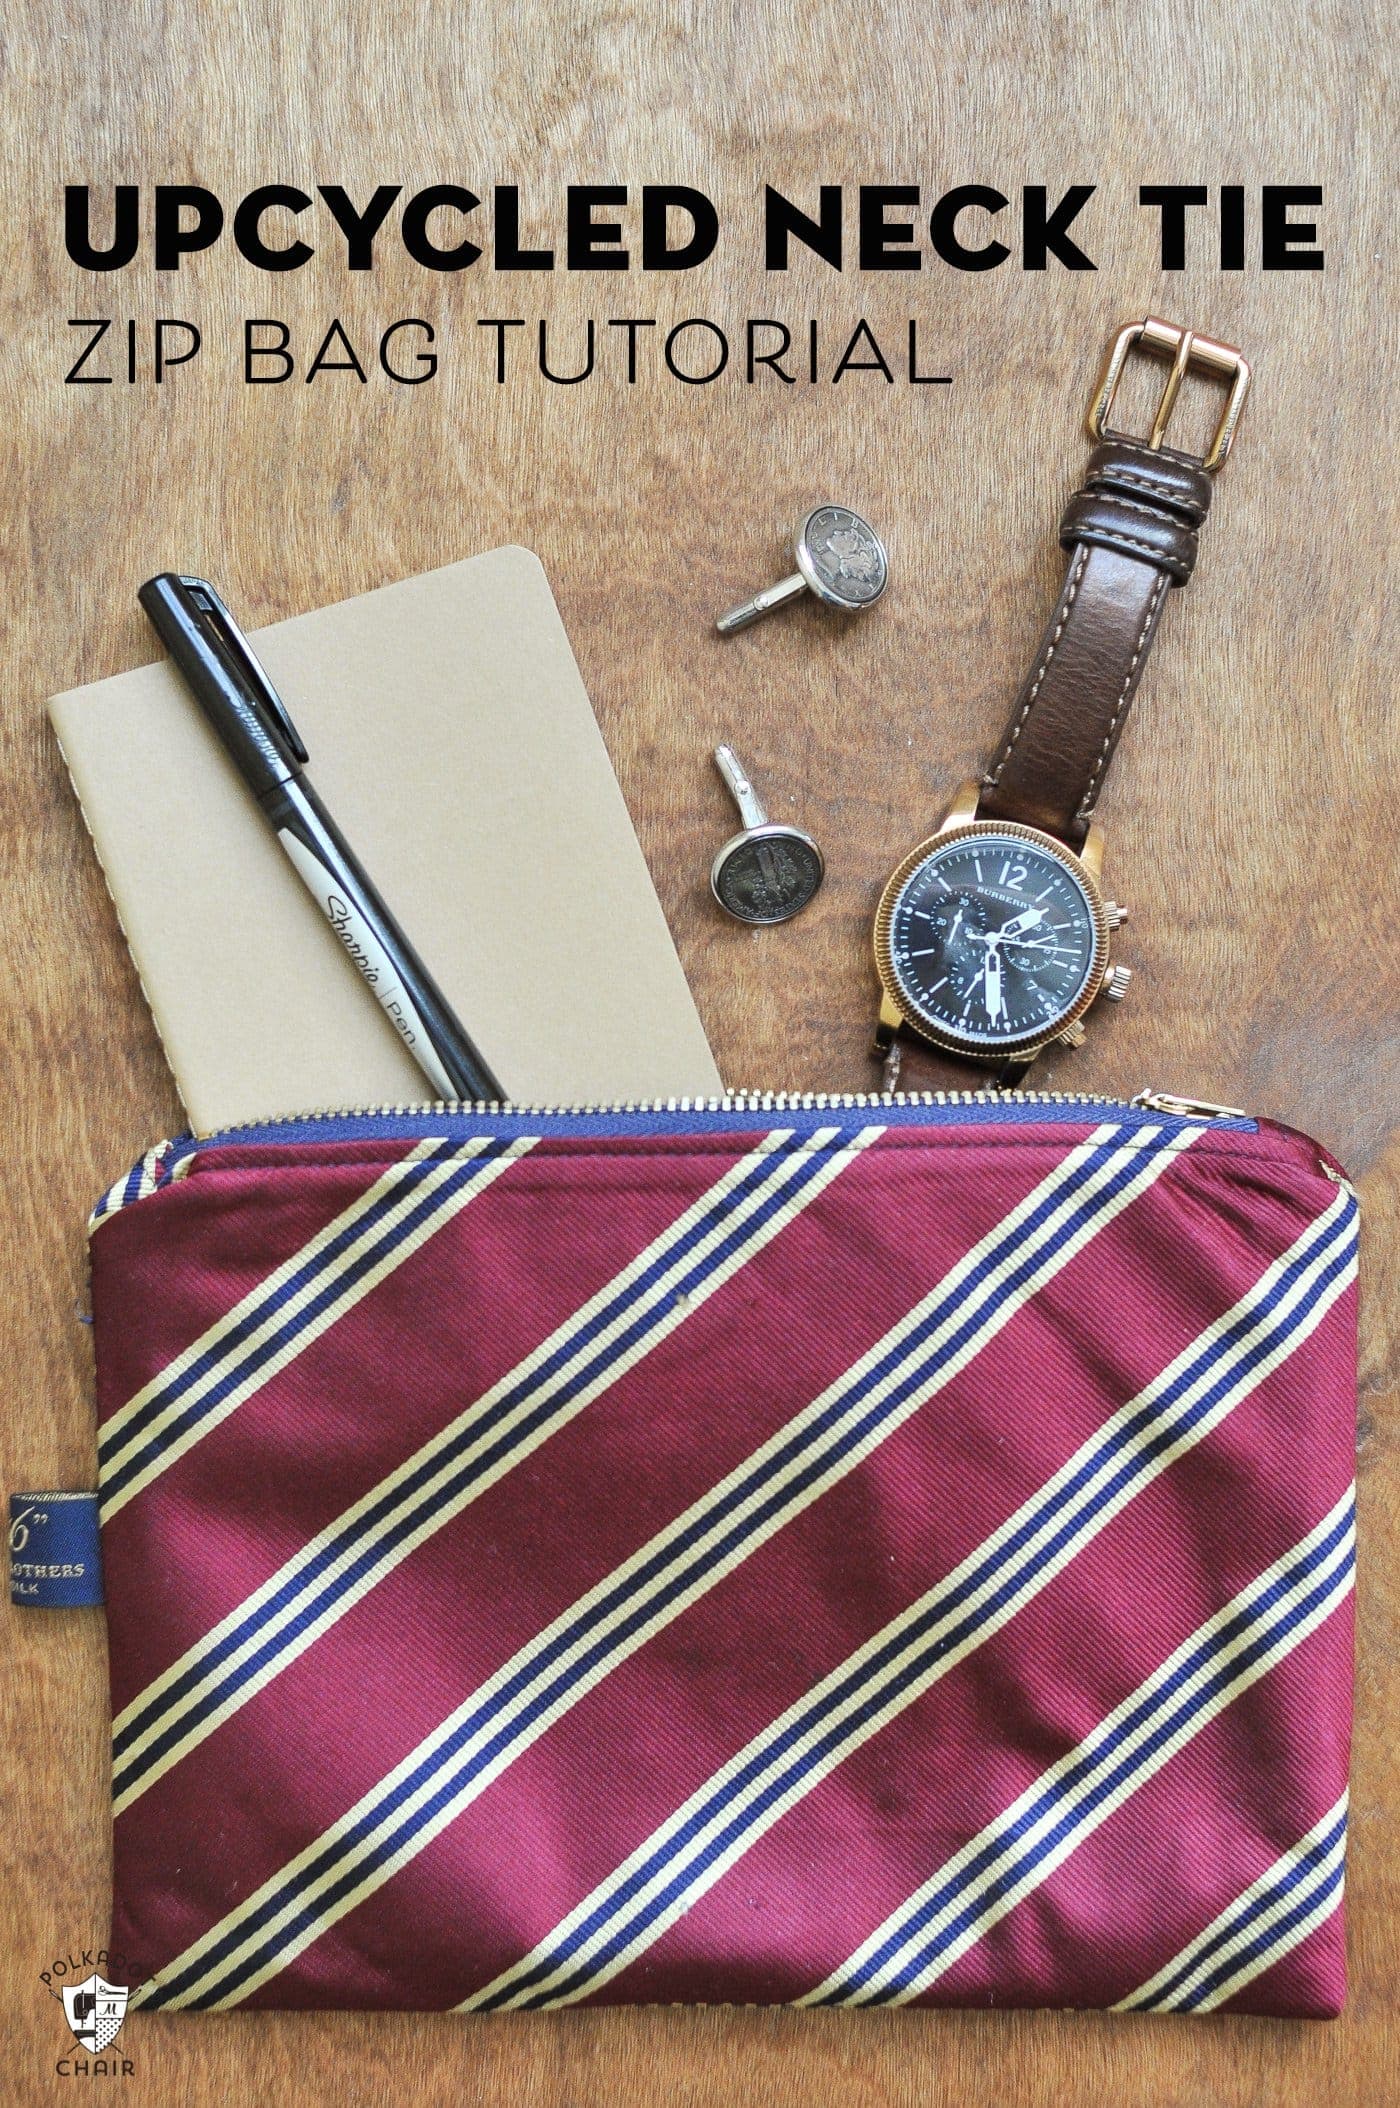 How to Make a Zip Bag from Old Ties